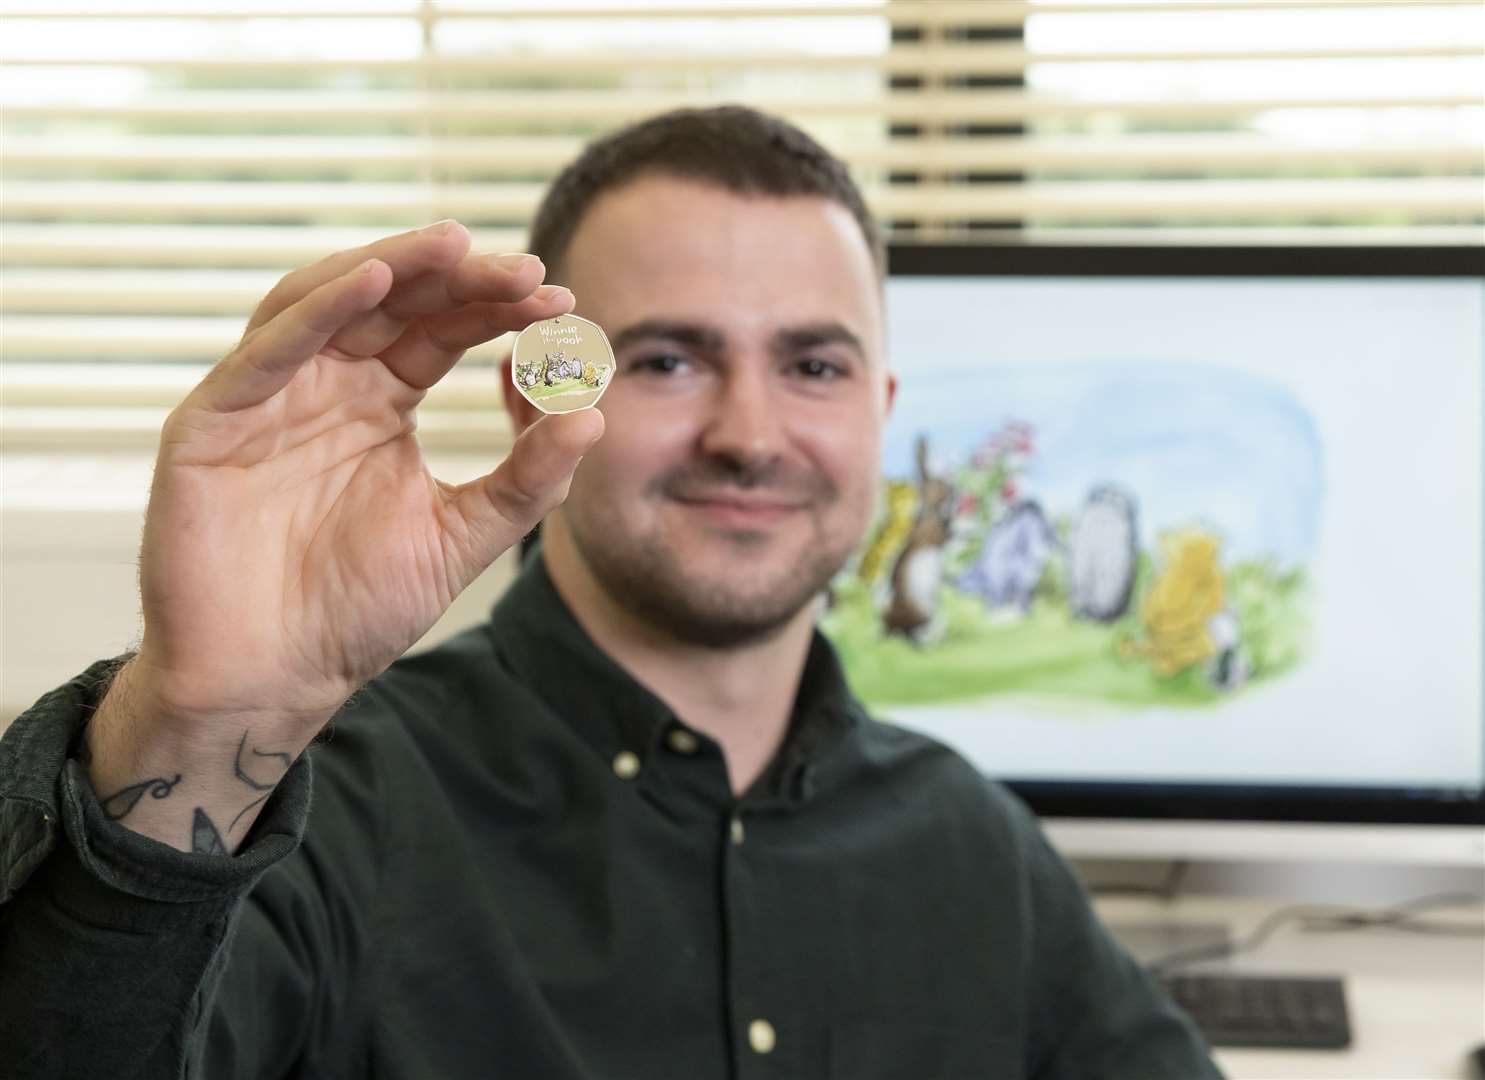 The Royal Mint designer Daniel Thorne with the new Winnie the Pooh and Friends coin